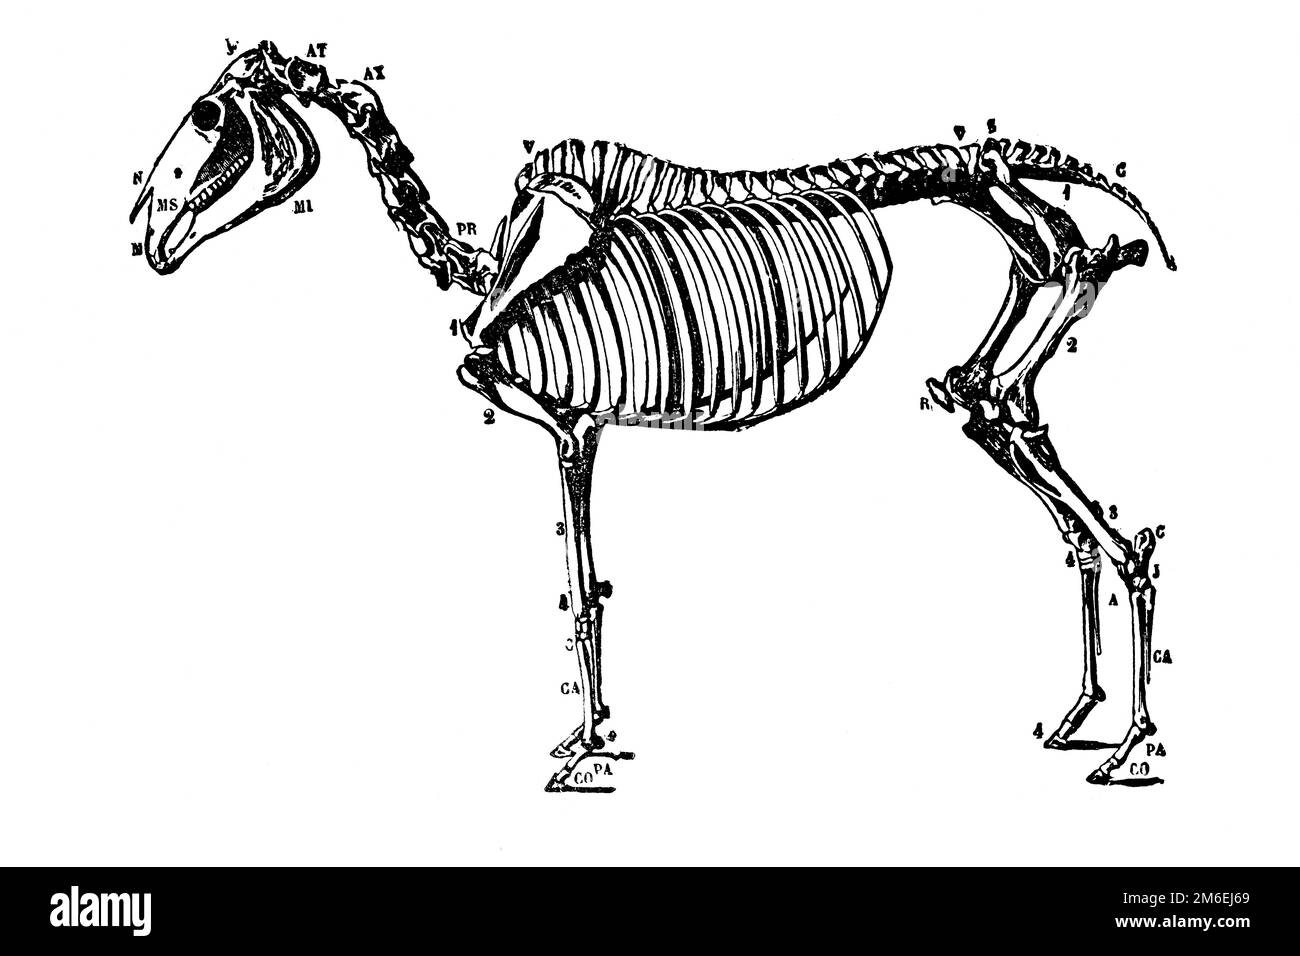 Horse skeleton. Antique illustration from a medical book, 1889. Stock Photo